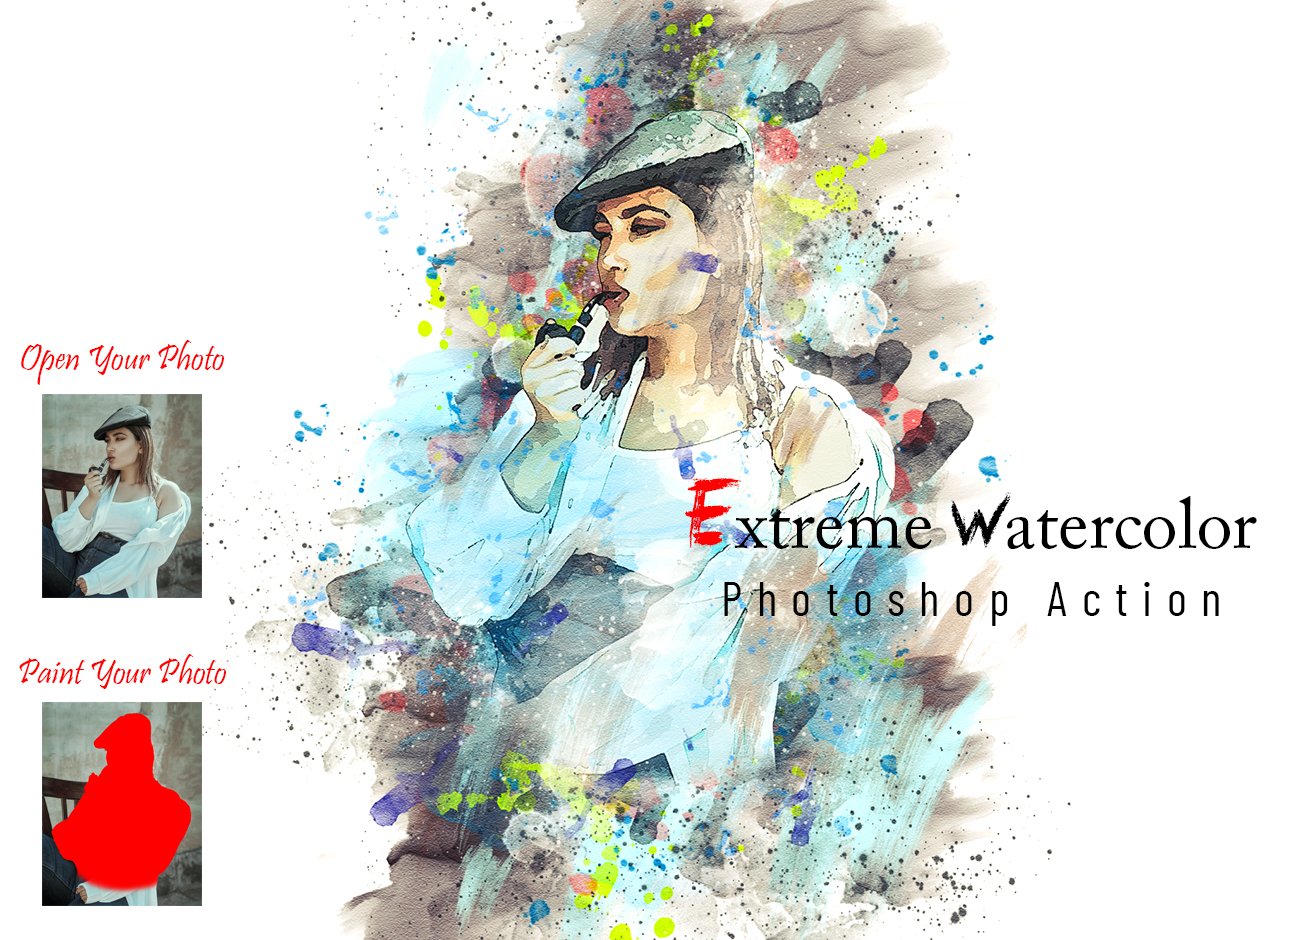 Extreme Watercolor Photoshop Actioncover image.